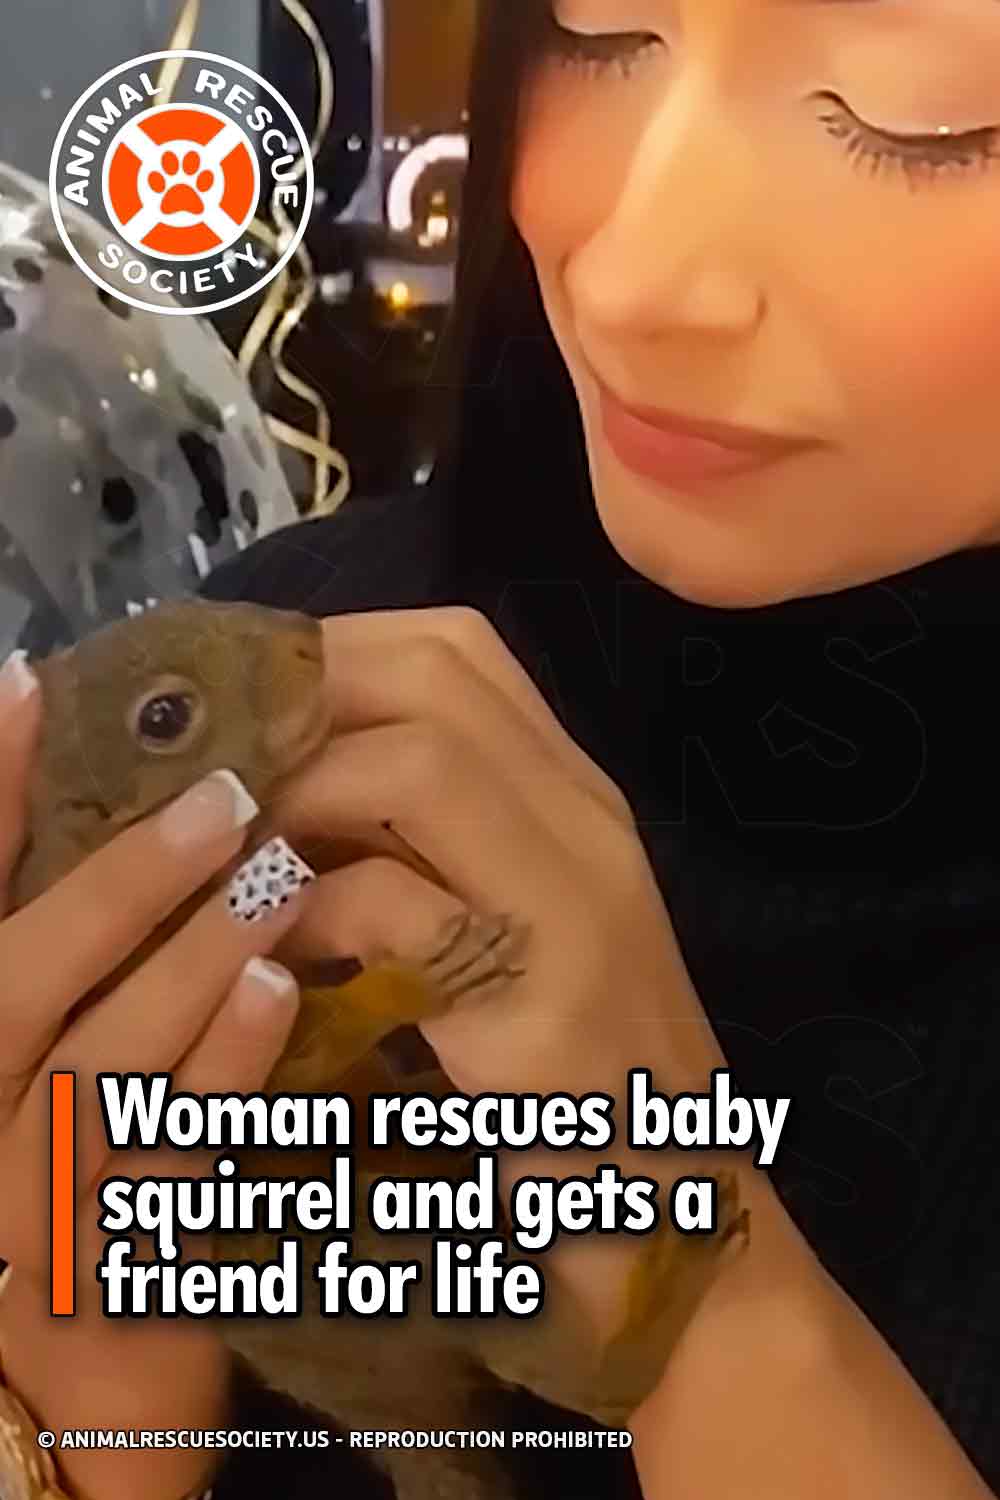 Woman rescues baby squirrel and gets a friend for life